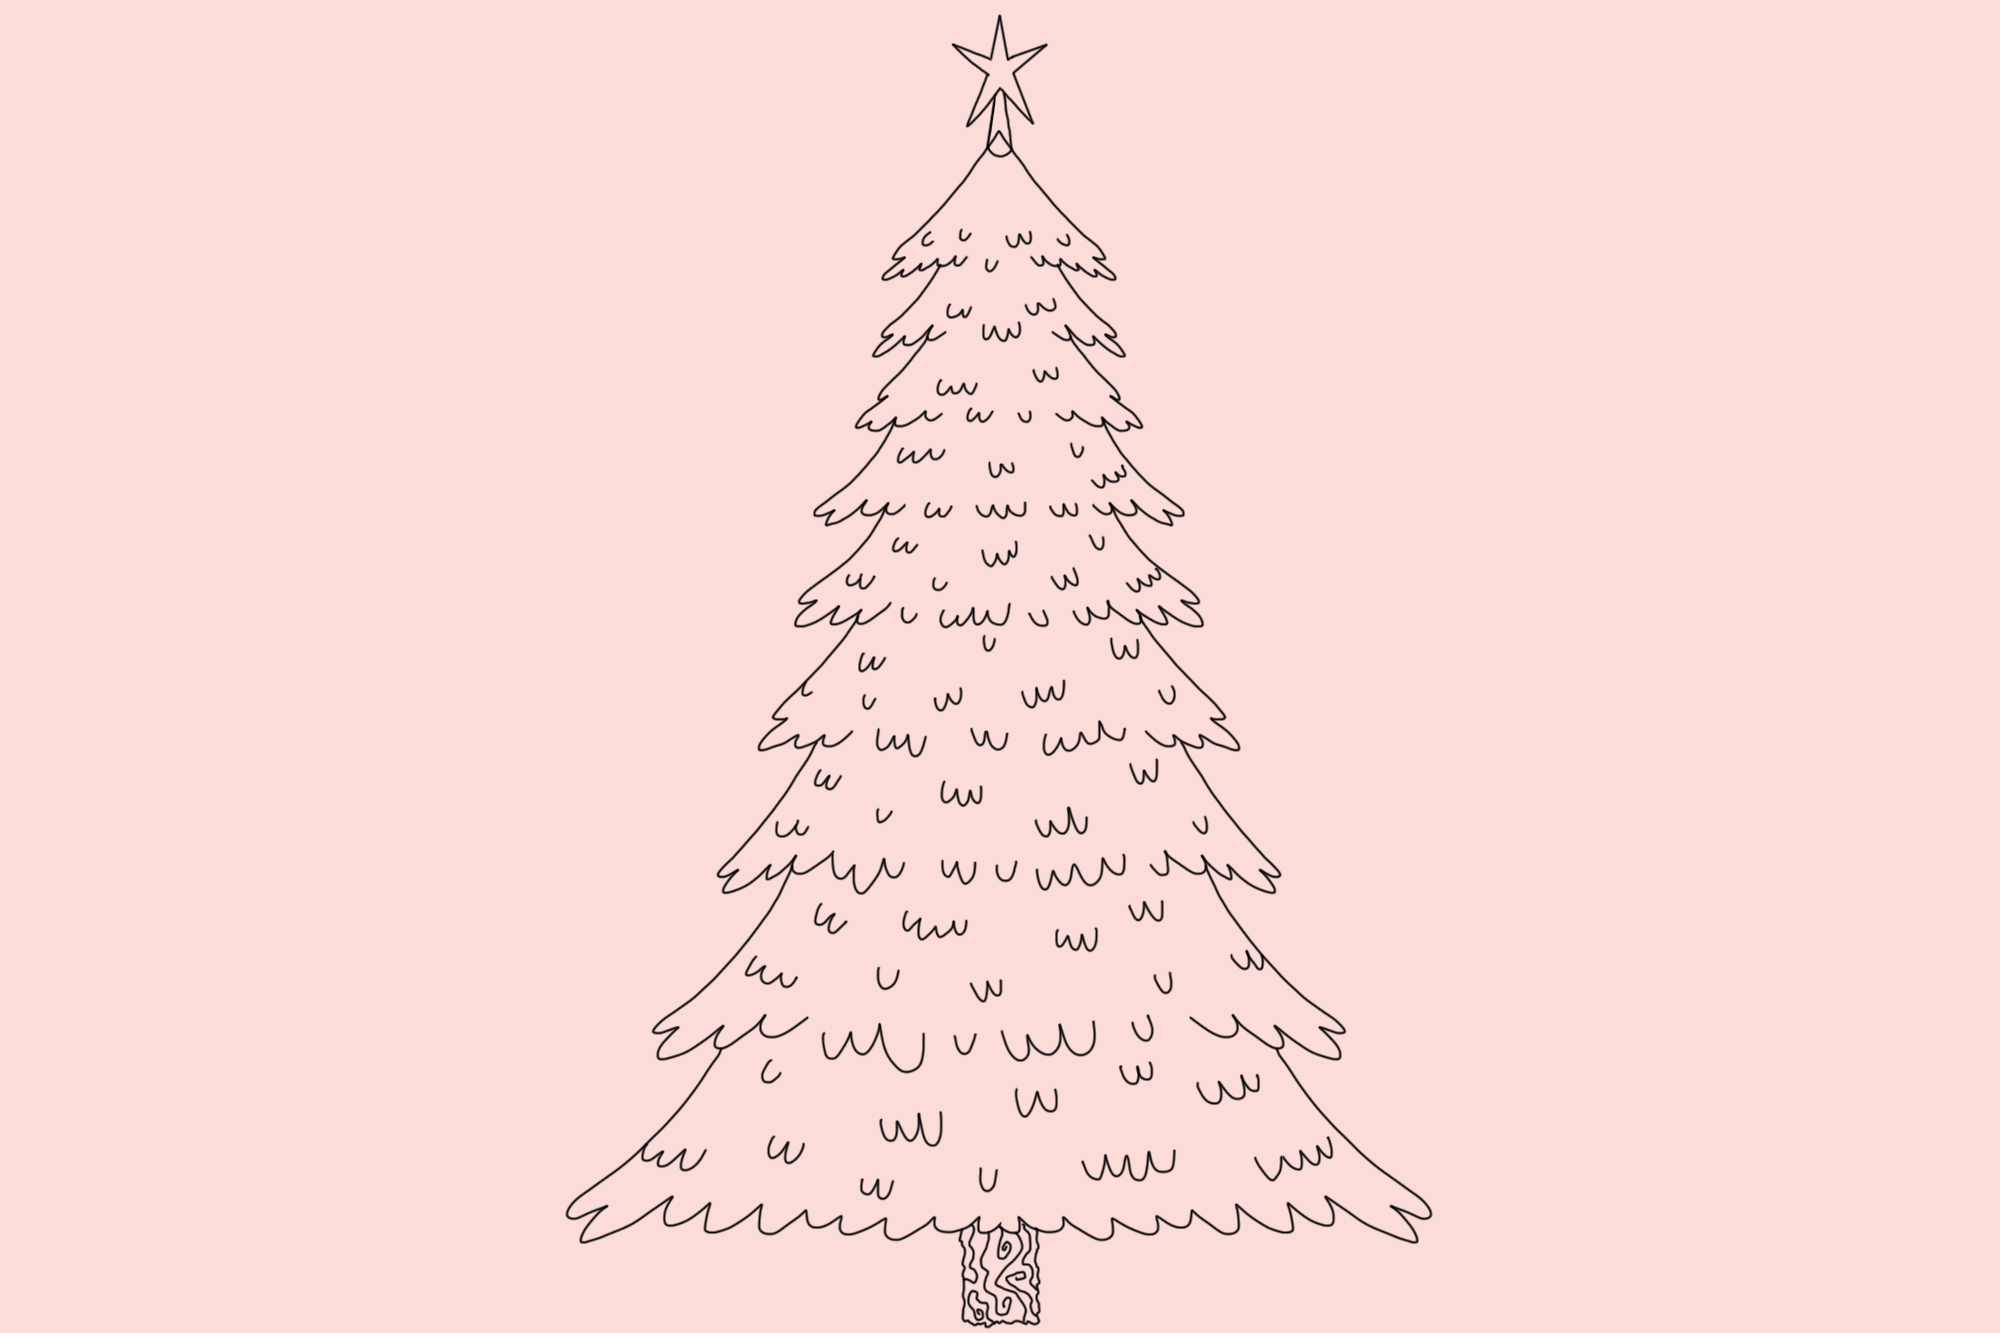 Marker pen Christmas tree | Decorate your own Christmas tree how ever you  like! Materials needed: White drawing paper or card stock, sketching  pencil, marker pens. See our list... | By McArt StudioFacebook